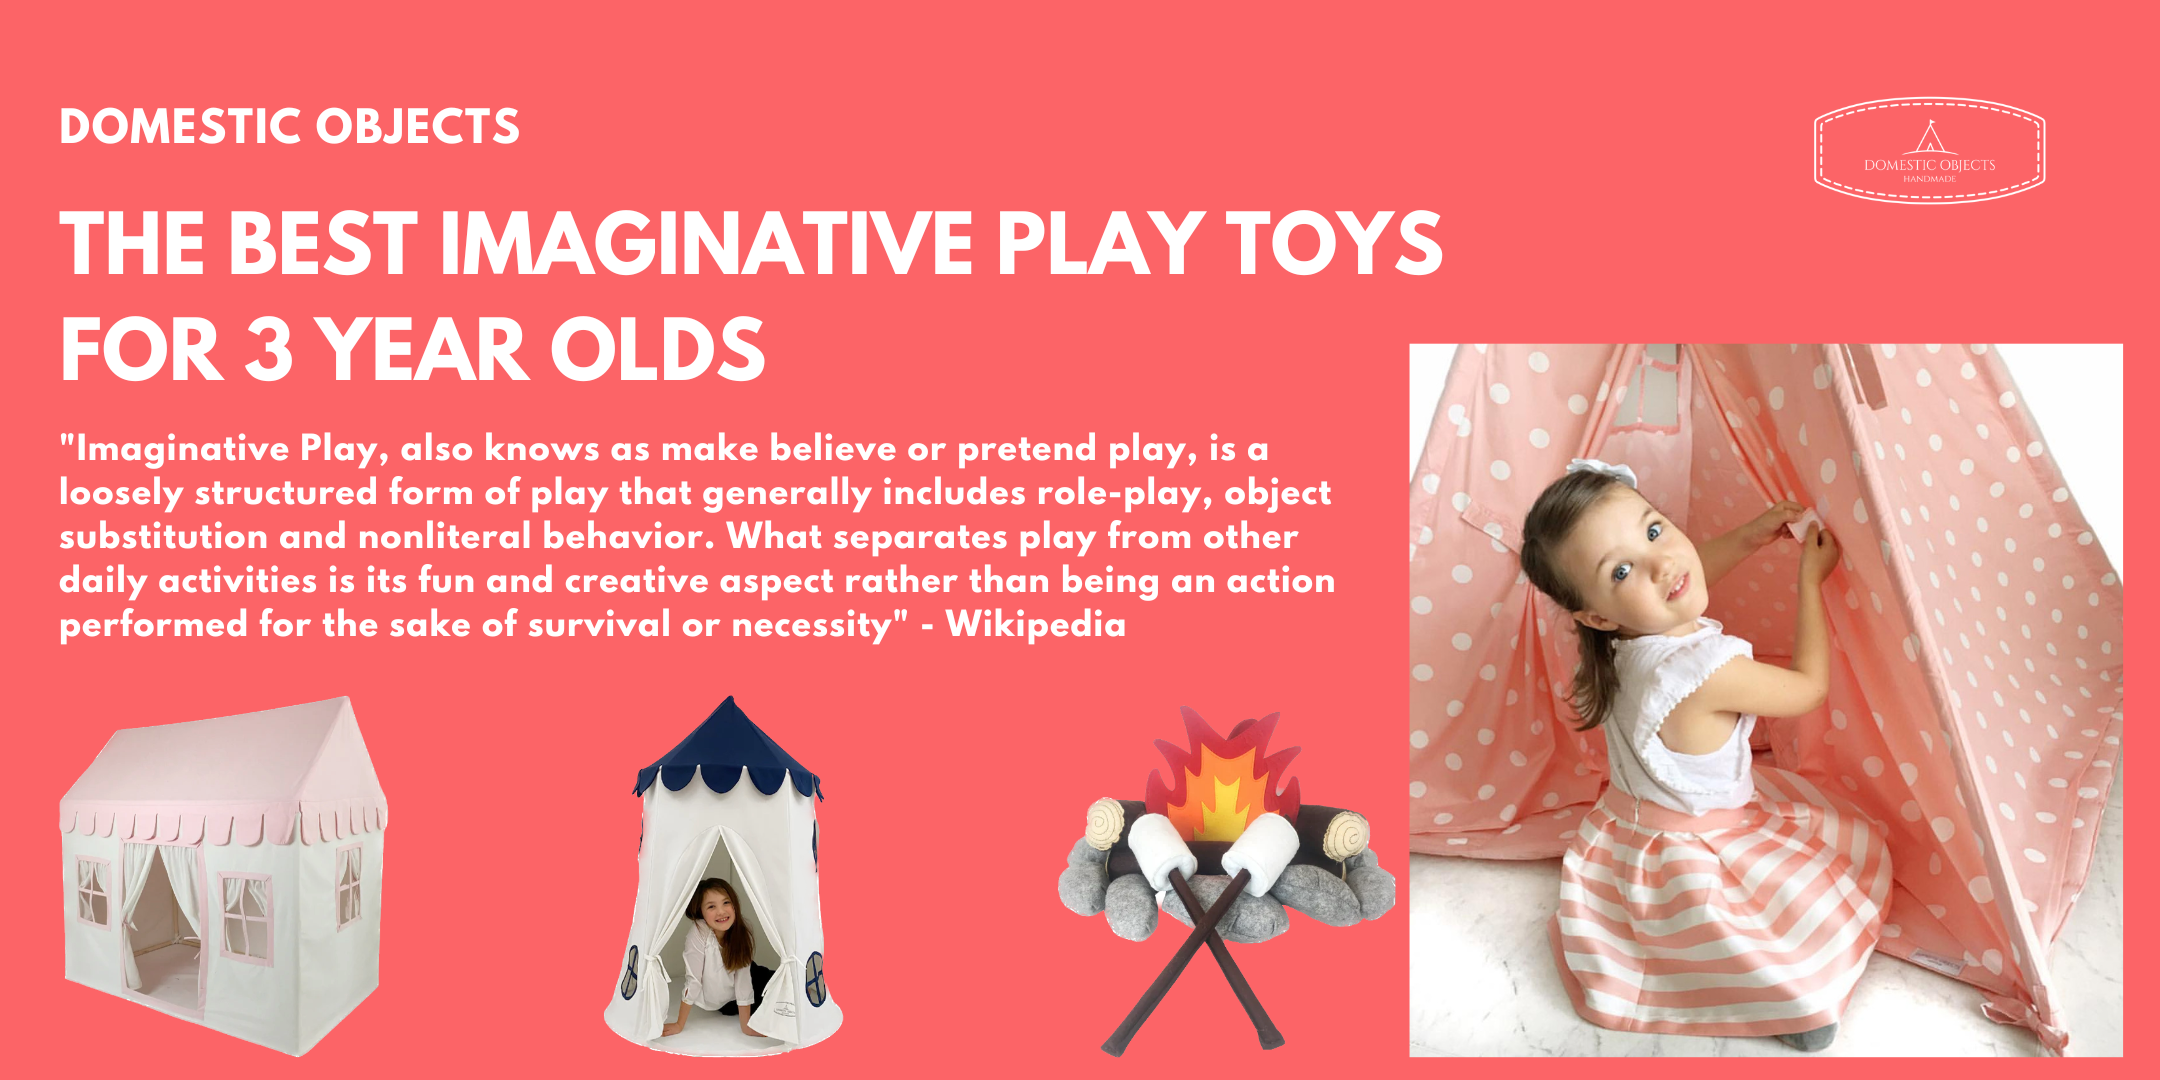 The best Imaginative Play Toys for 3 Year Olds